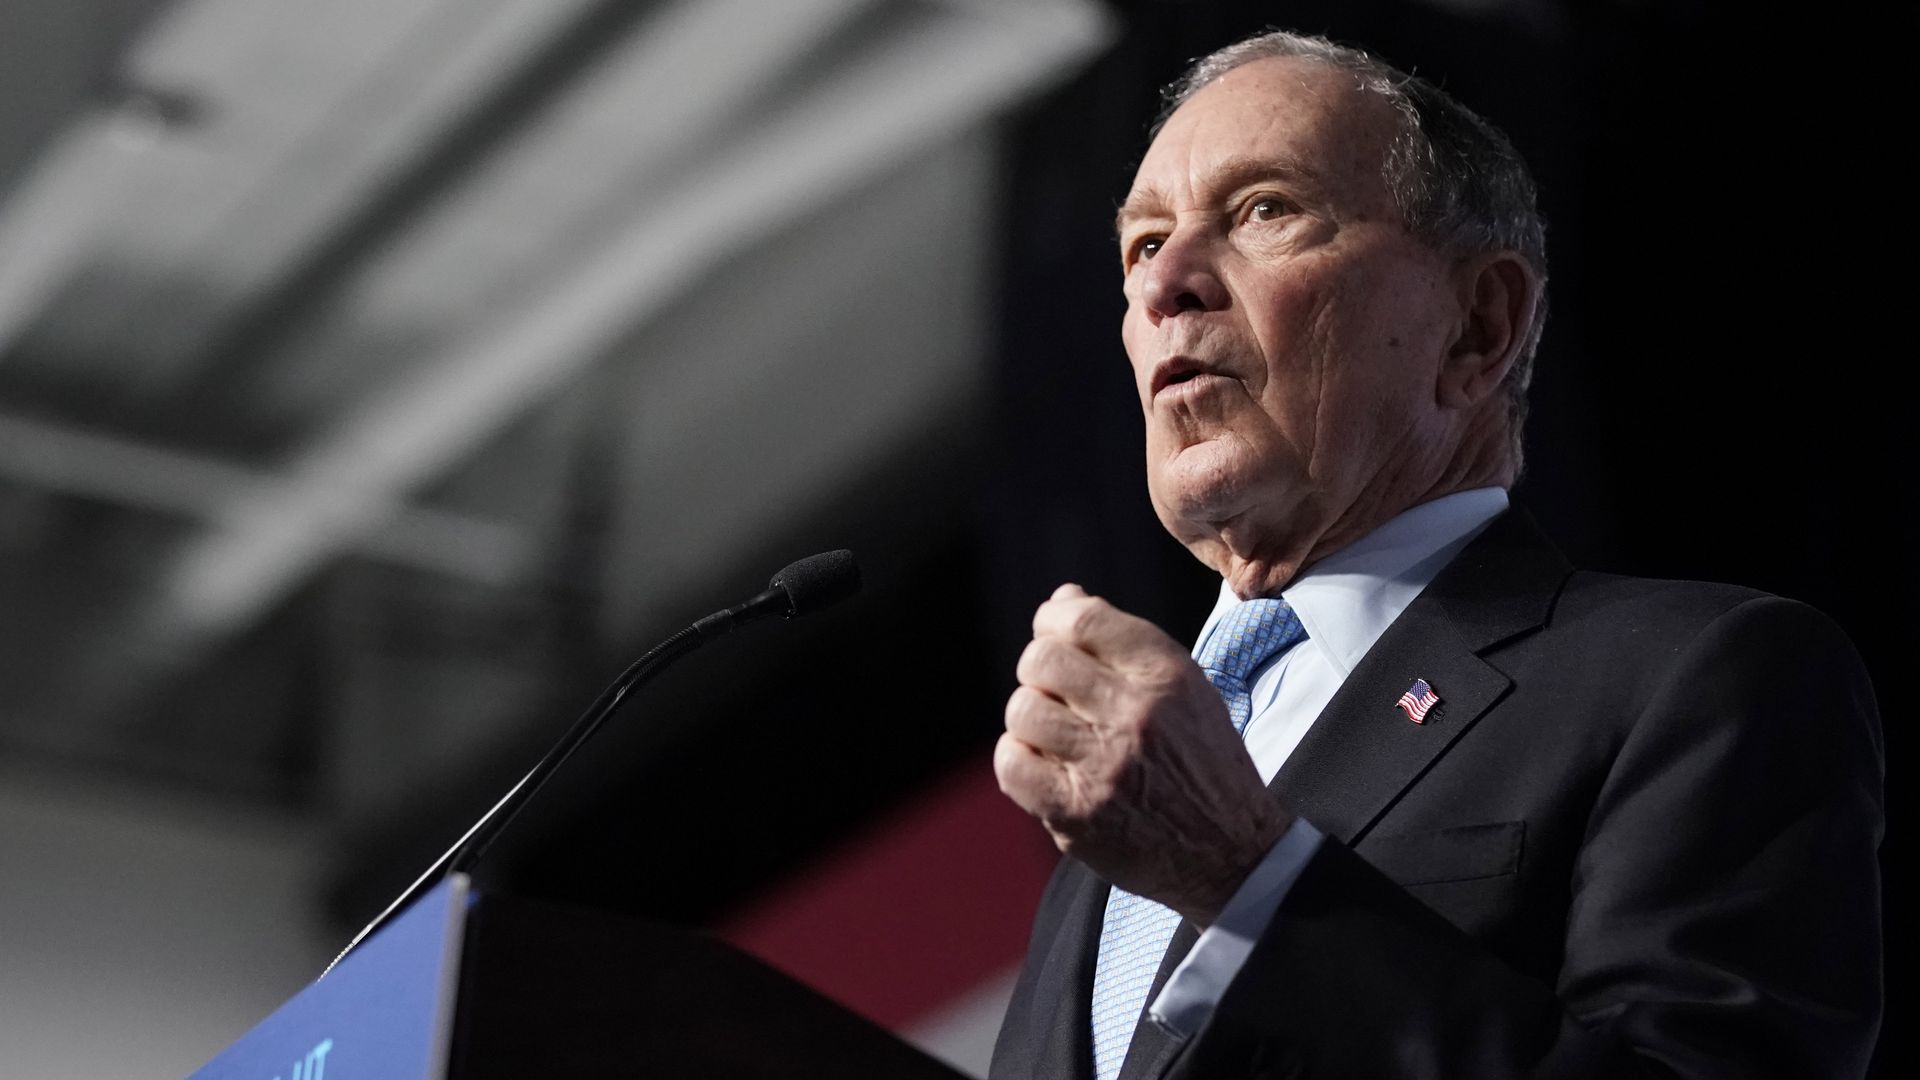 In this image, Michael Bloomberg stands at a podium in a suit.